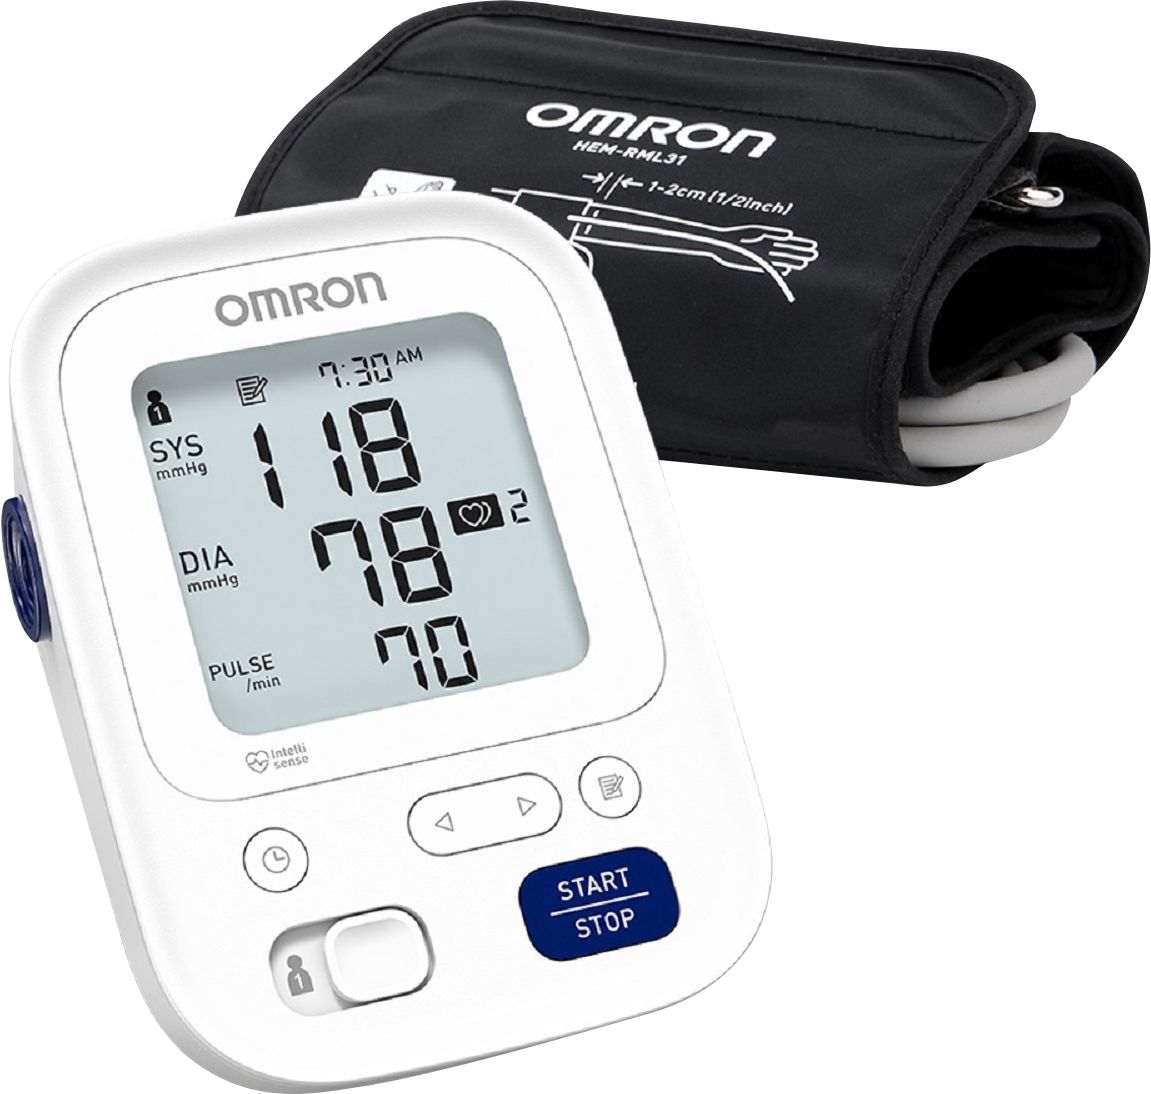 The 5 best blood pressure monitors of 2022